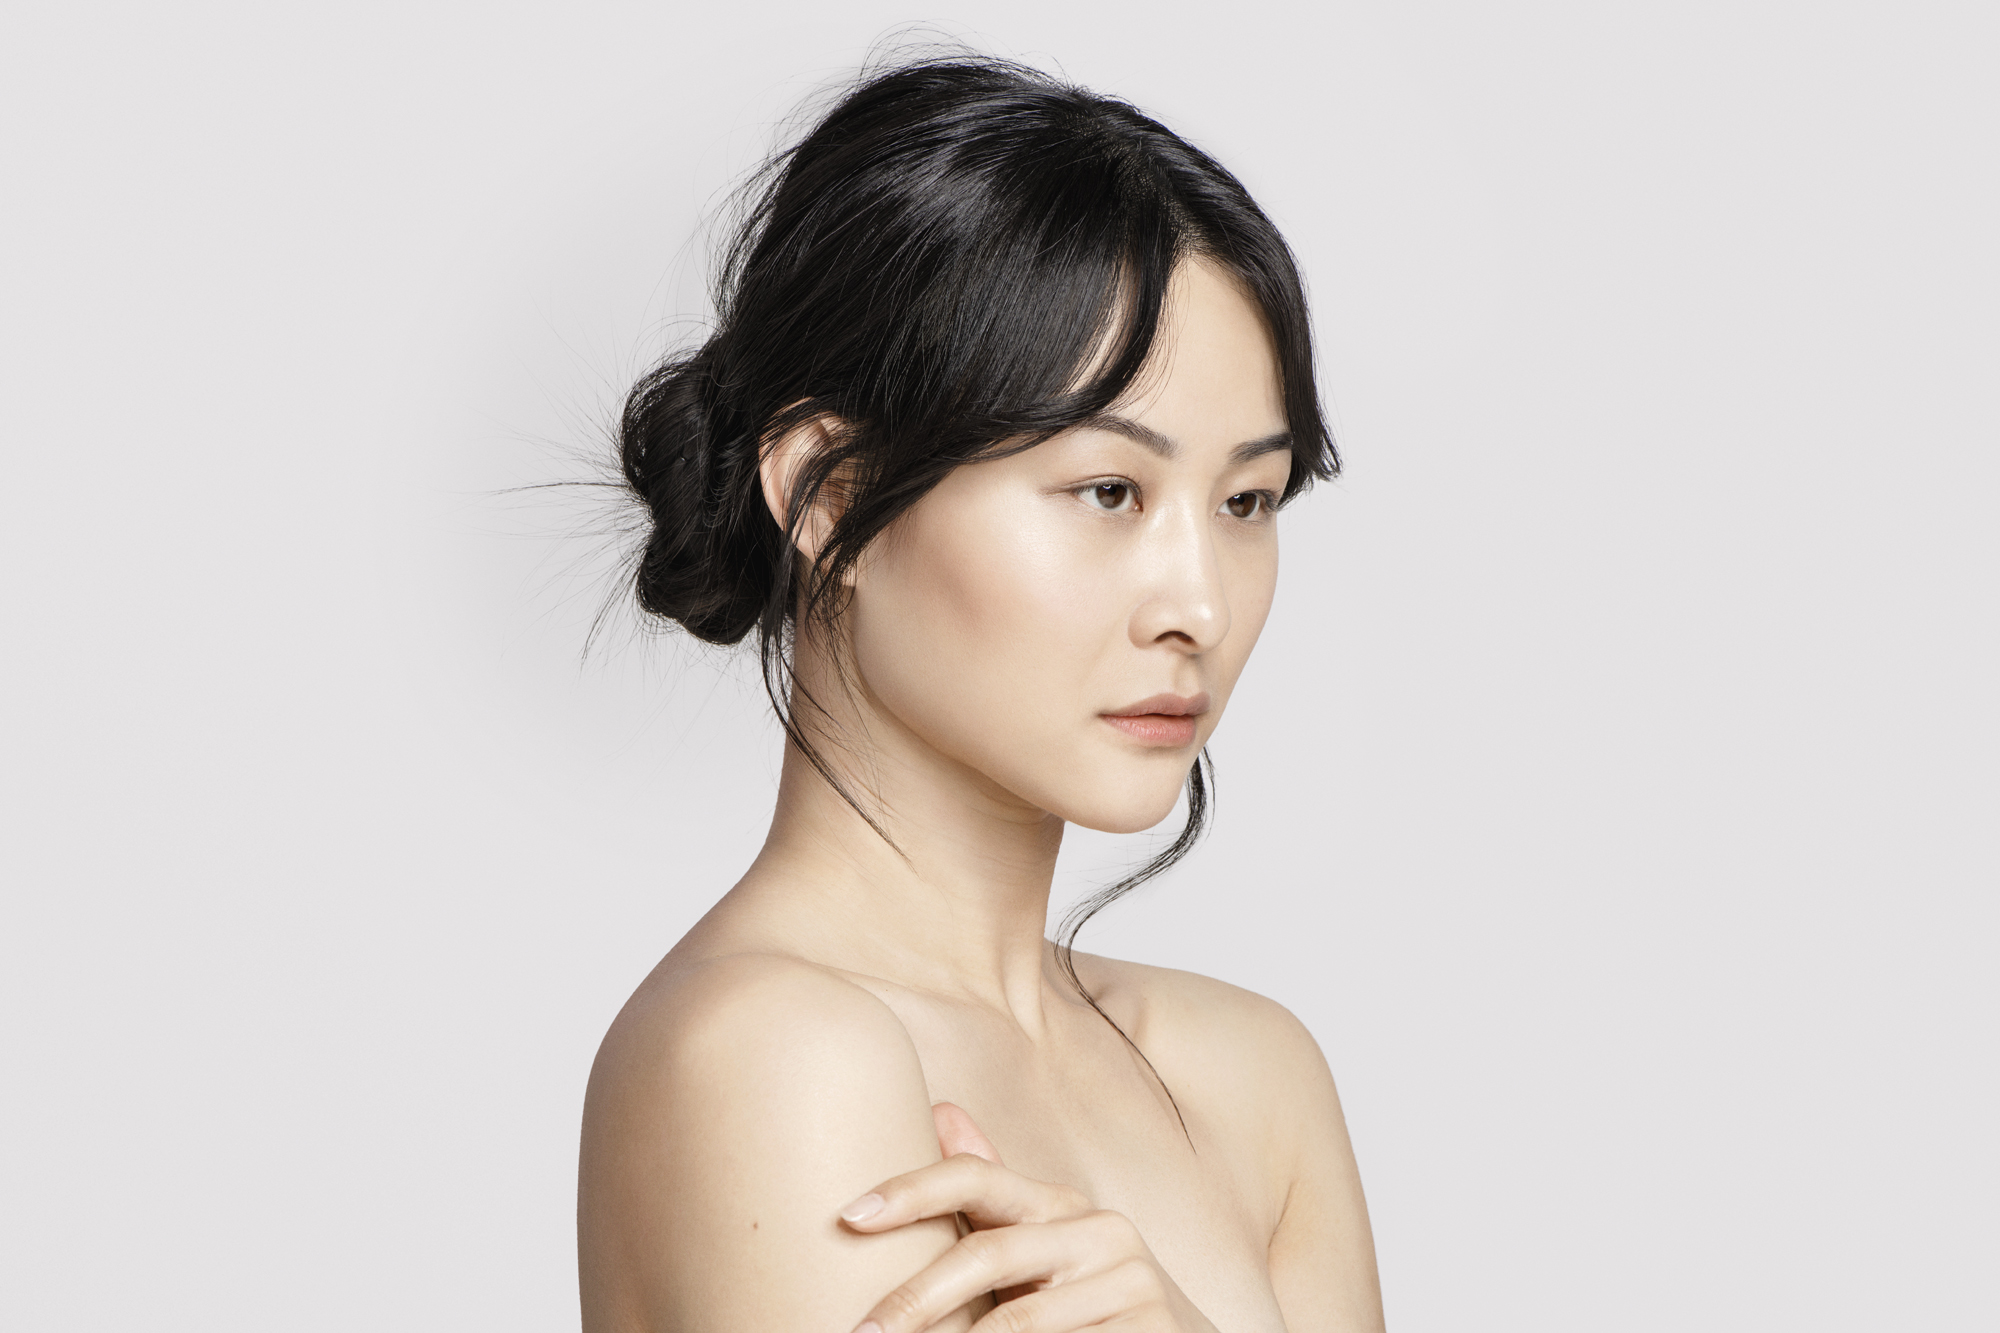 Image in-cosmetics 2019 Envisioning Beauty at Clariant. (Photo: Clariant)